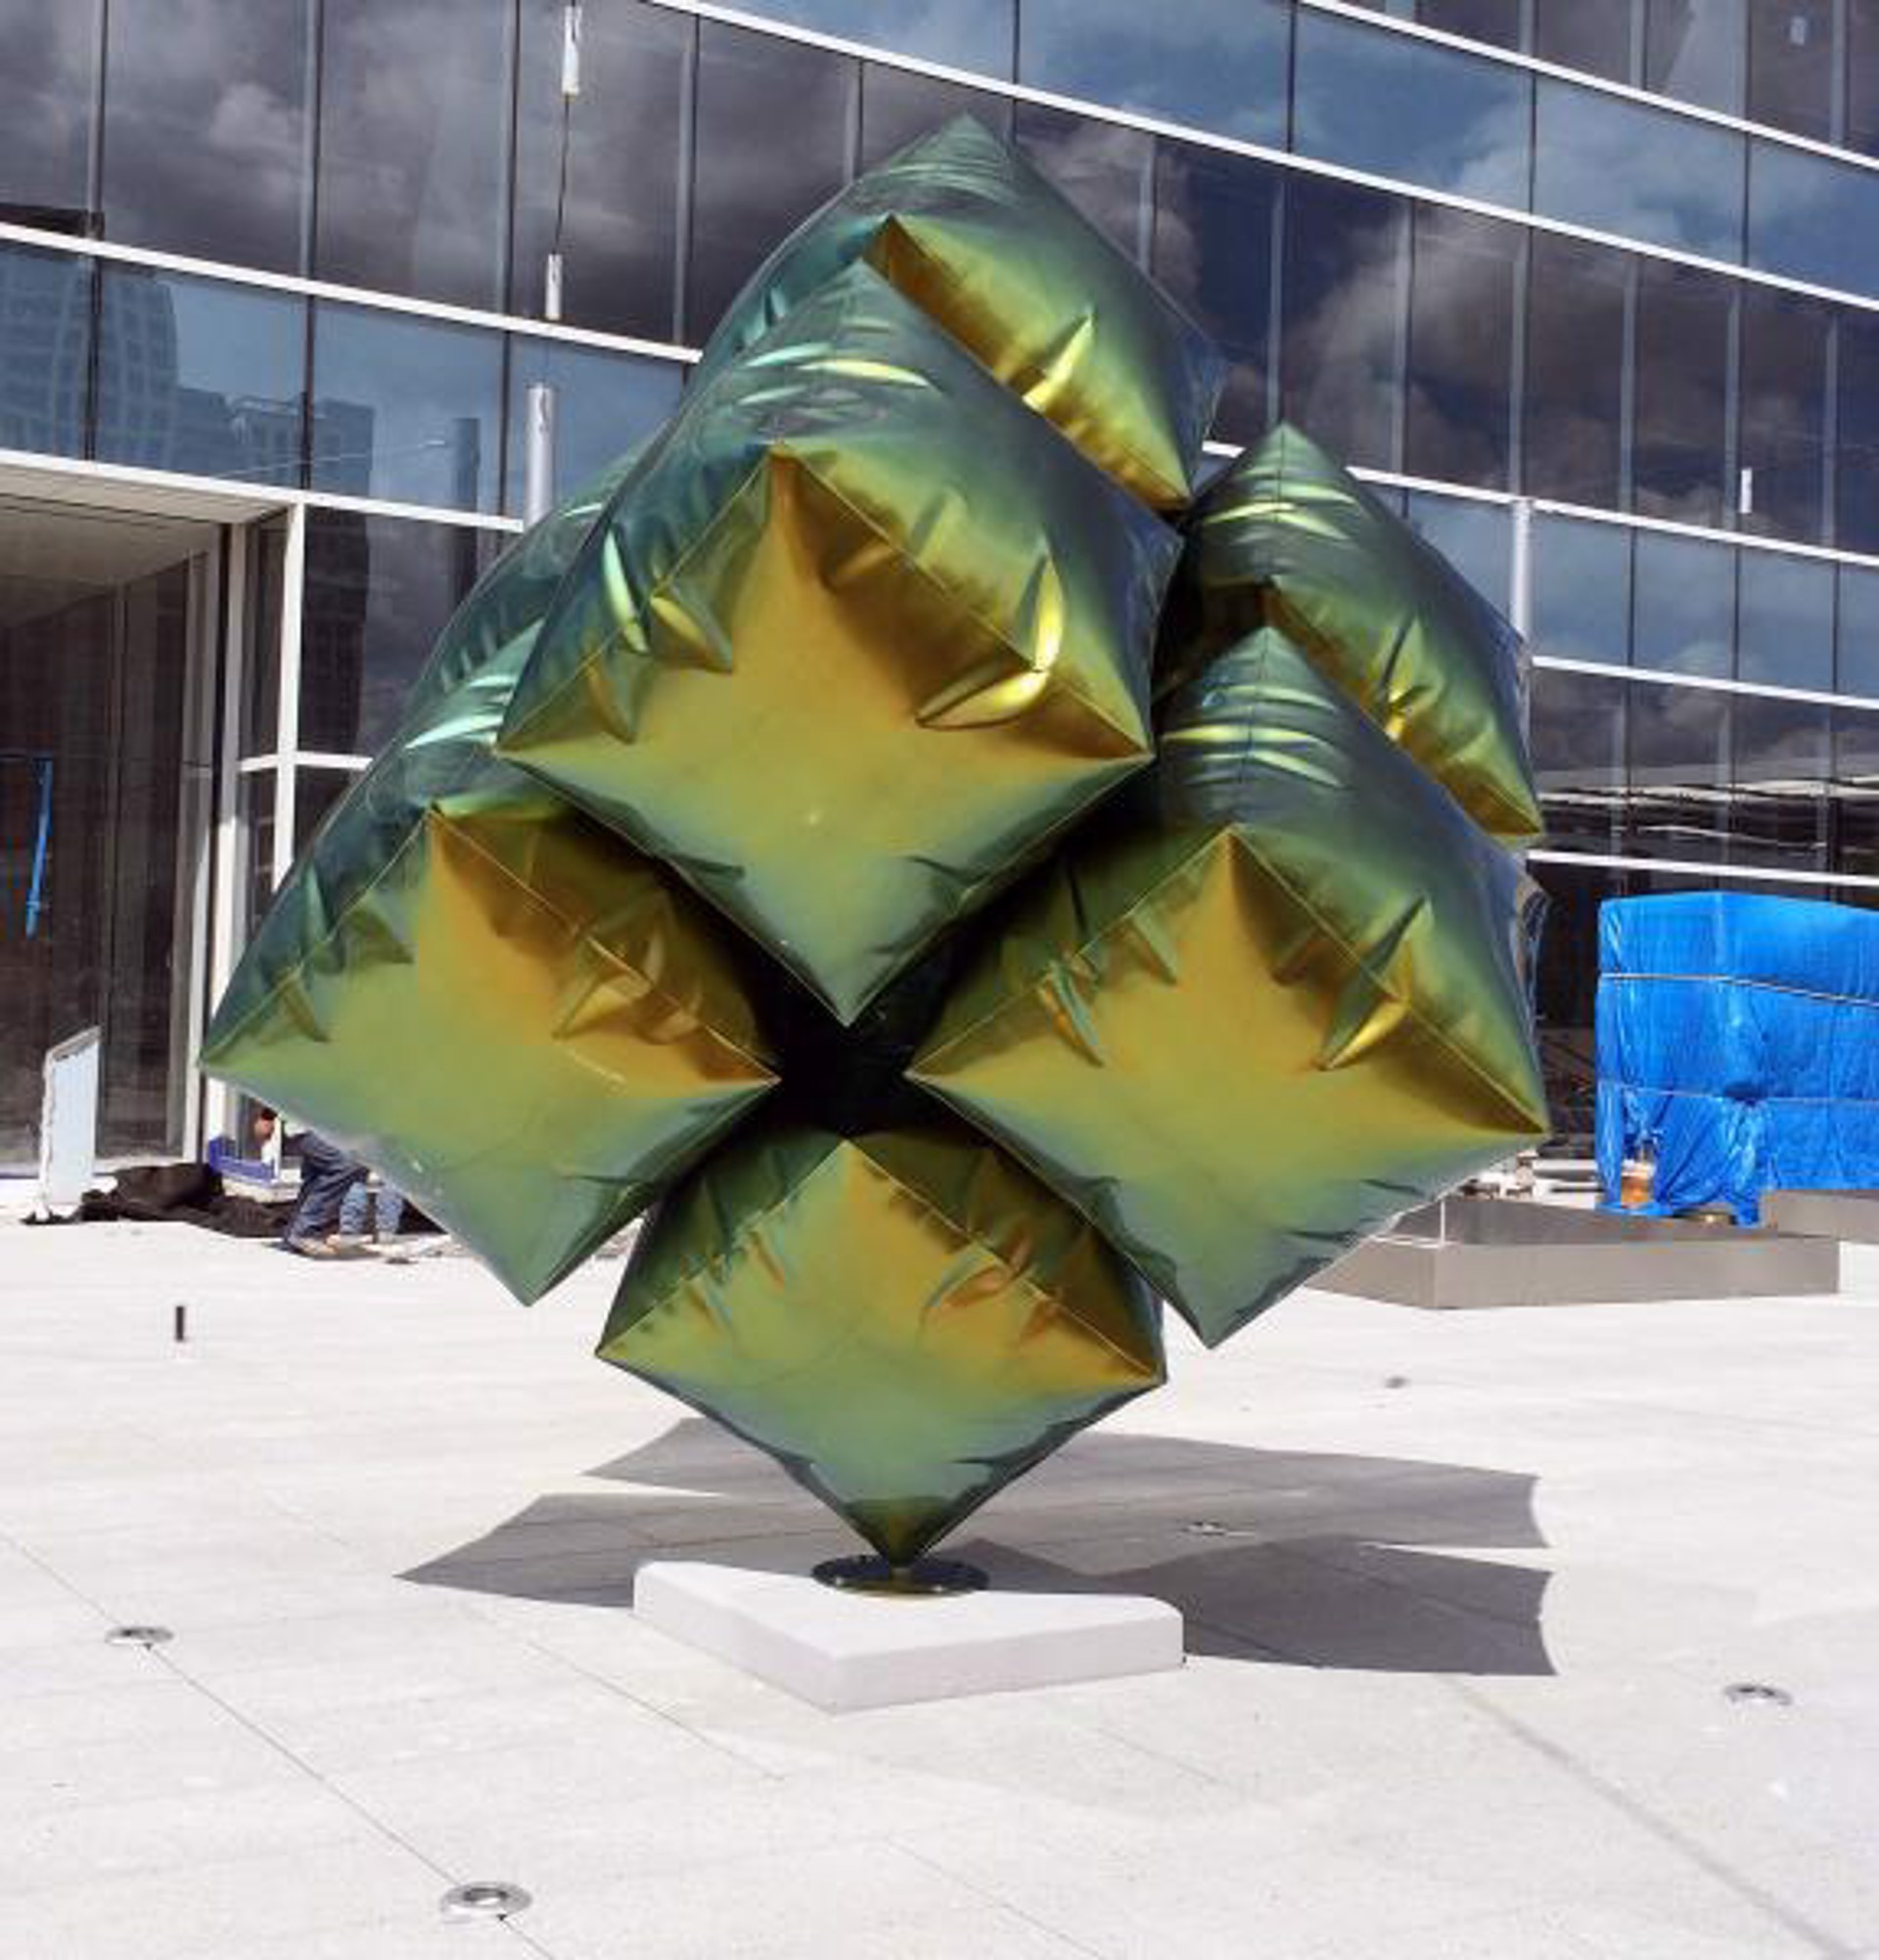 Dallas Public Art KMPG Plaza "Cubed" 2015 by William Cannings